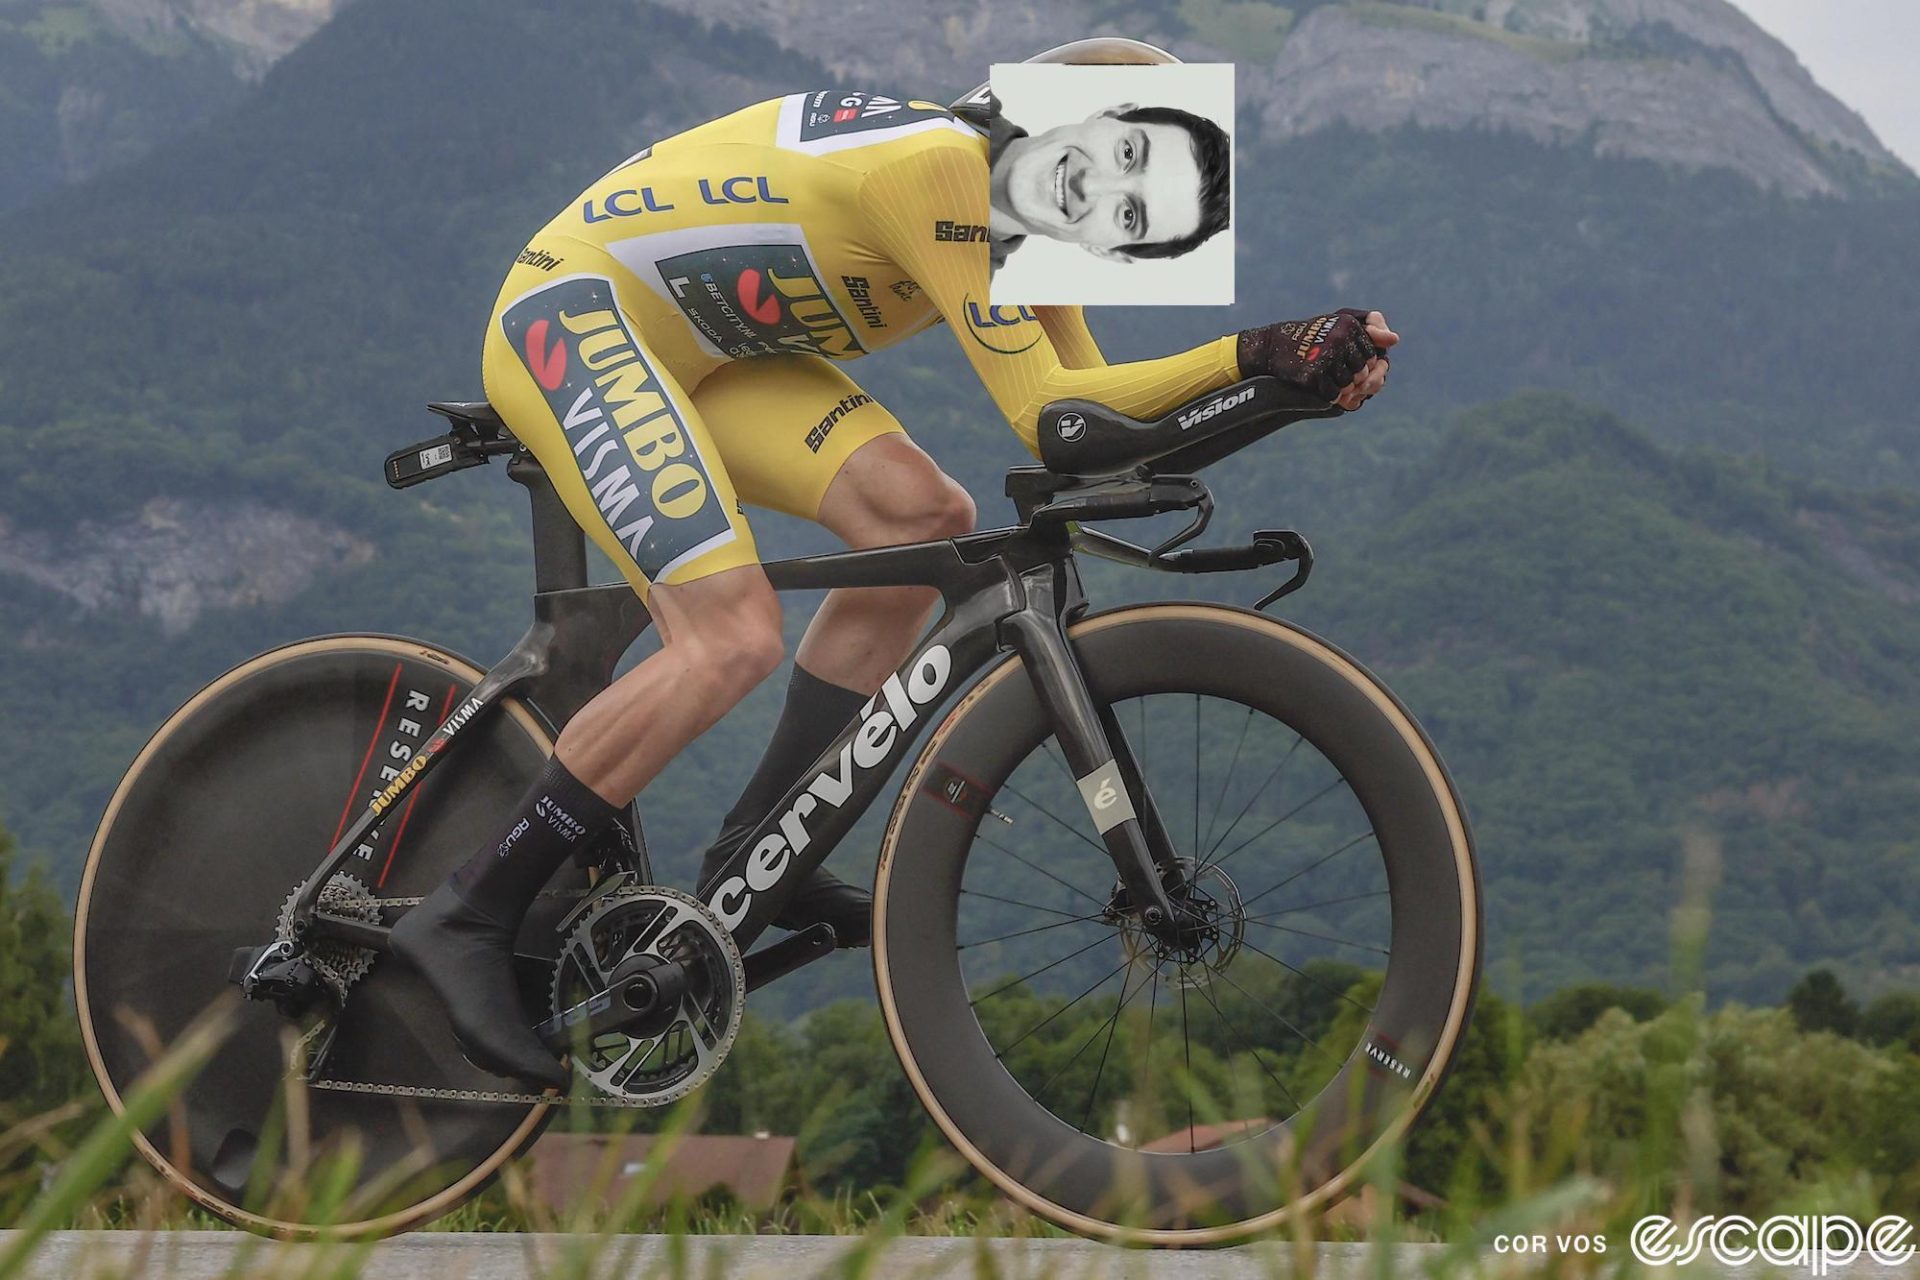 Jonas Vingegaard time trials on stage 16 of the 2023 Tour de France. Ronan Mc Laughlin's head shot is crudely photoshopped in place of Jonas' face, with Ronan's head facing sideways.